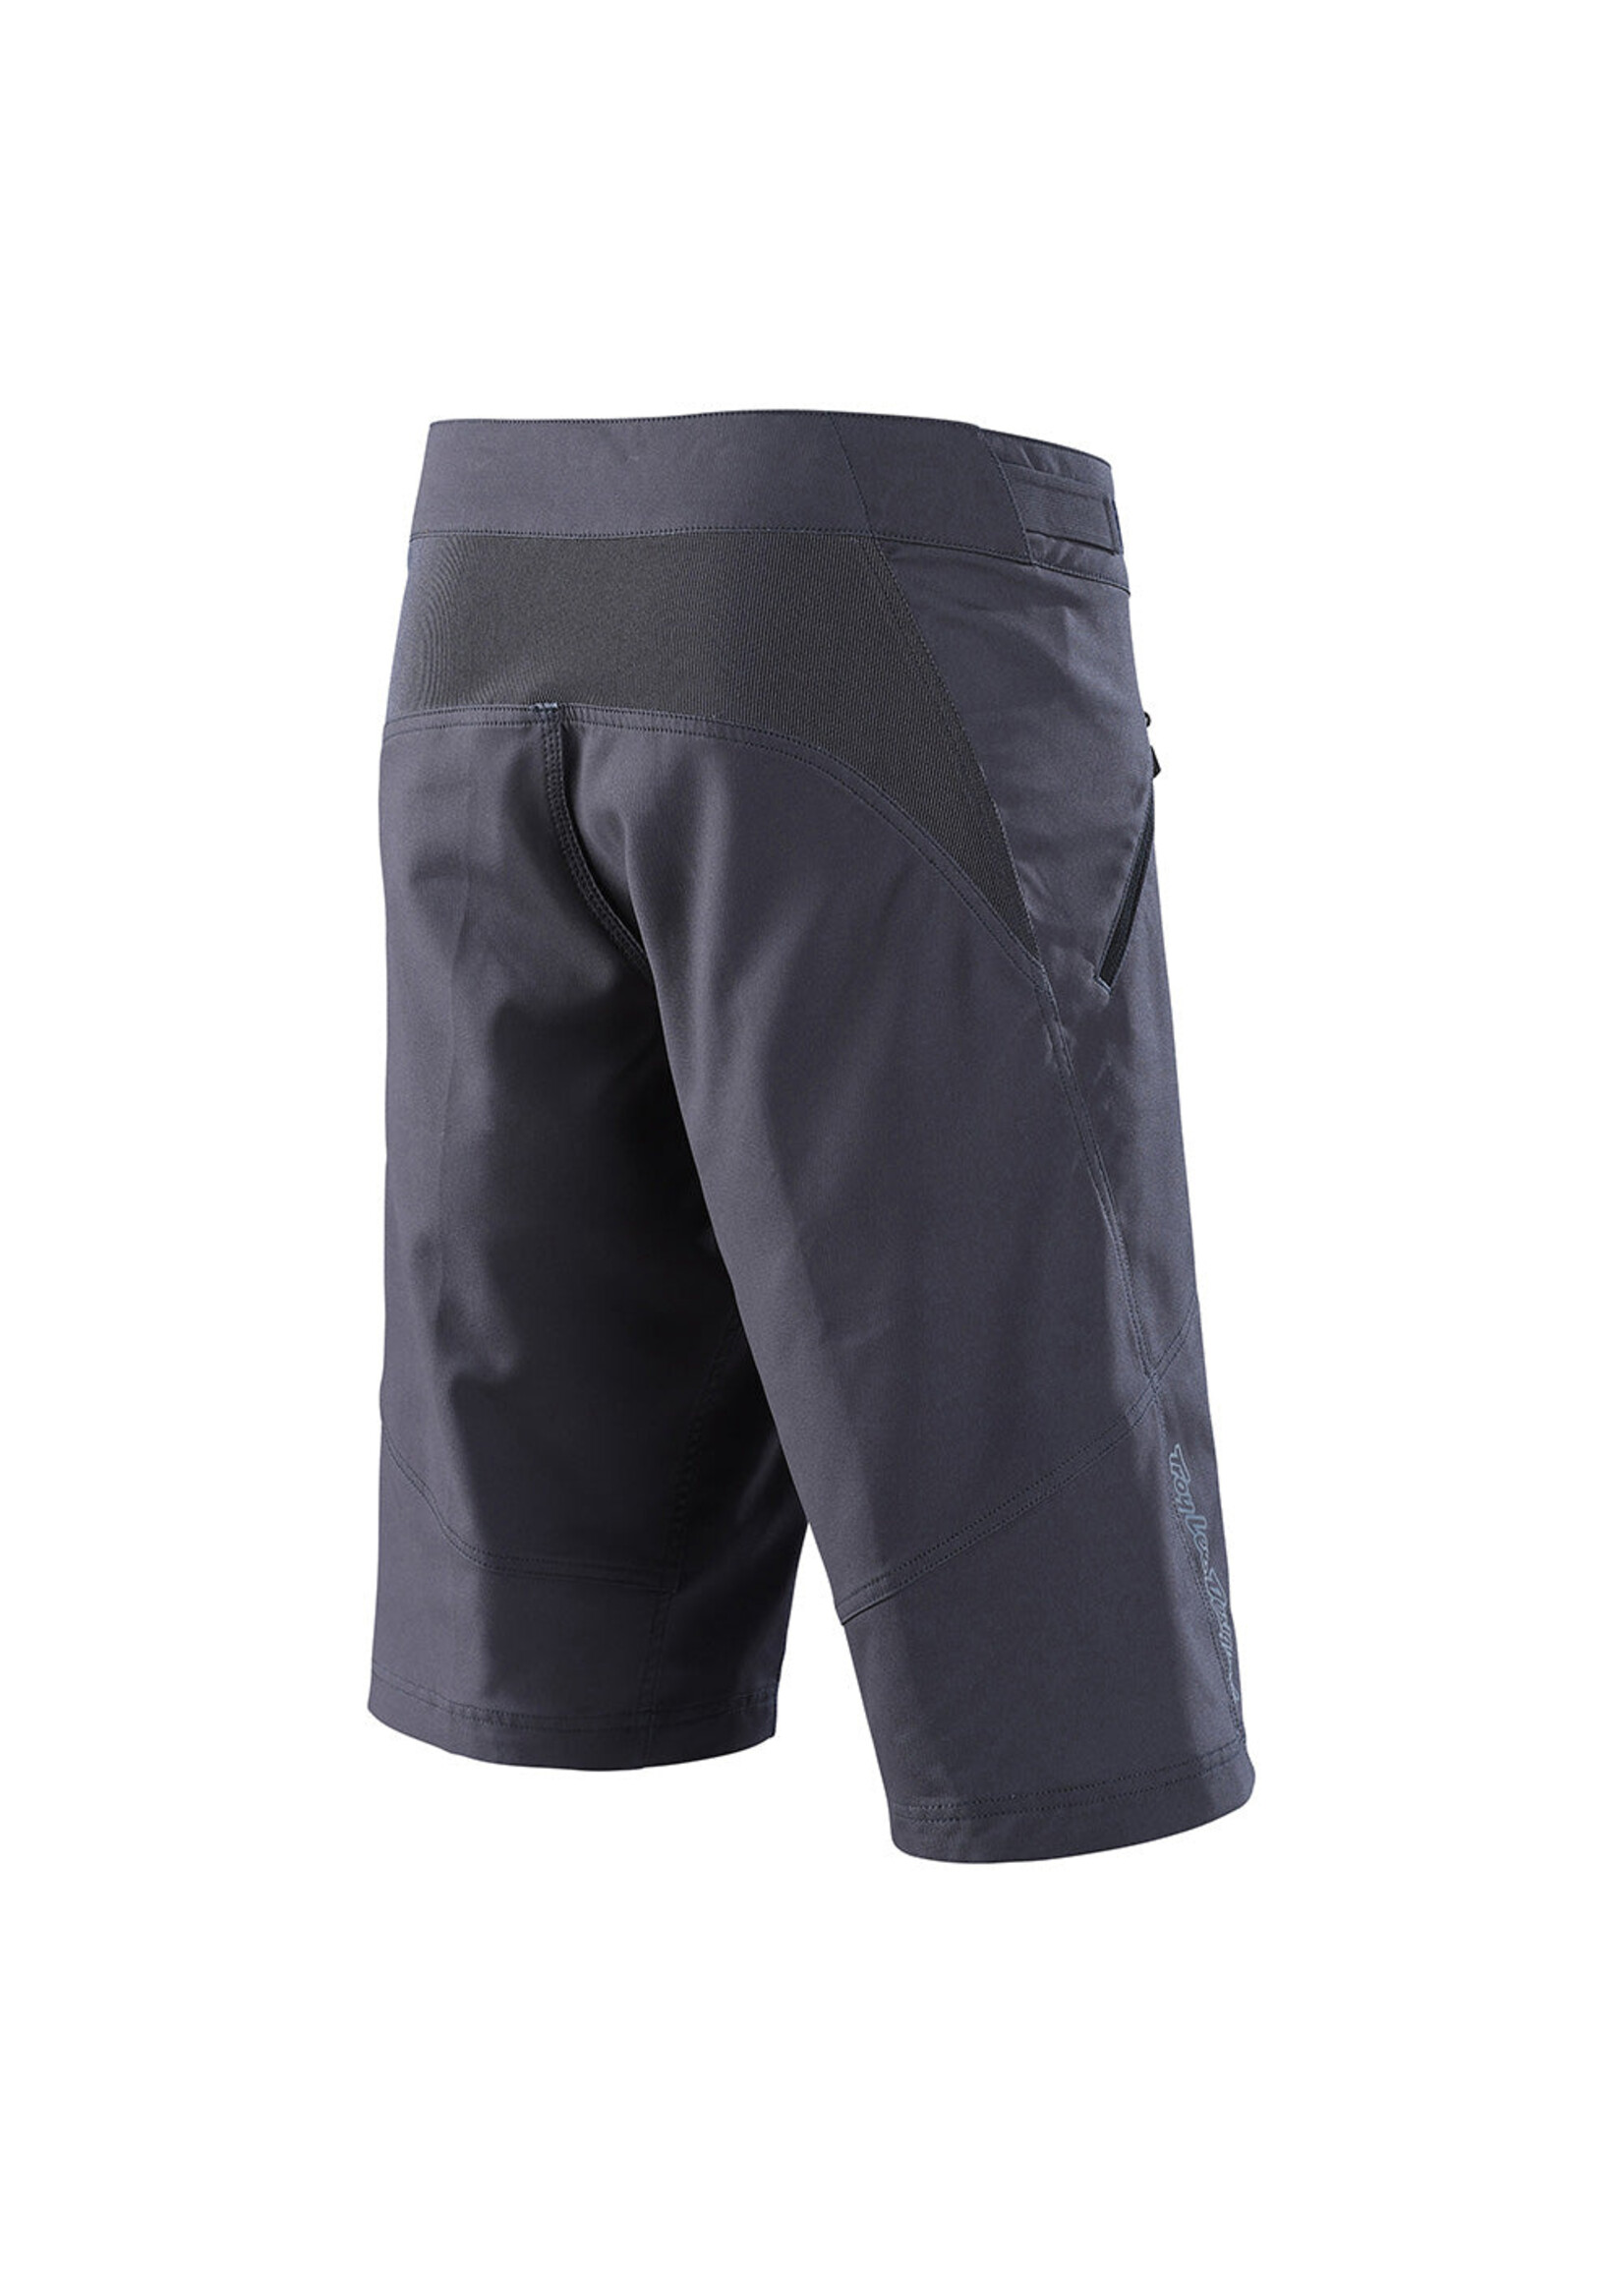 Troy Lee Designs Skyline Short with Liner - Iron